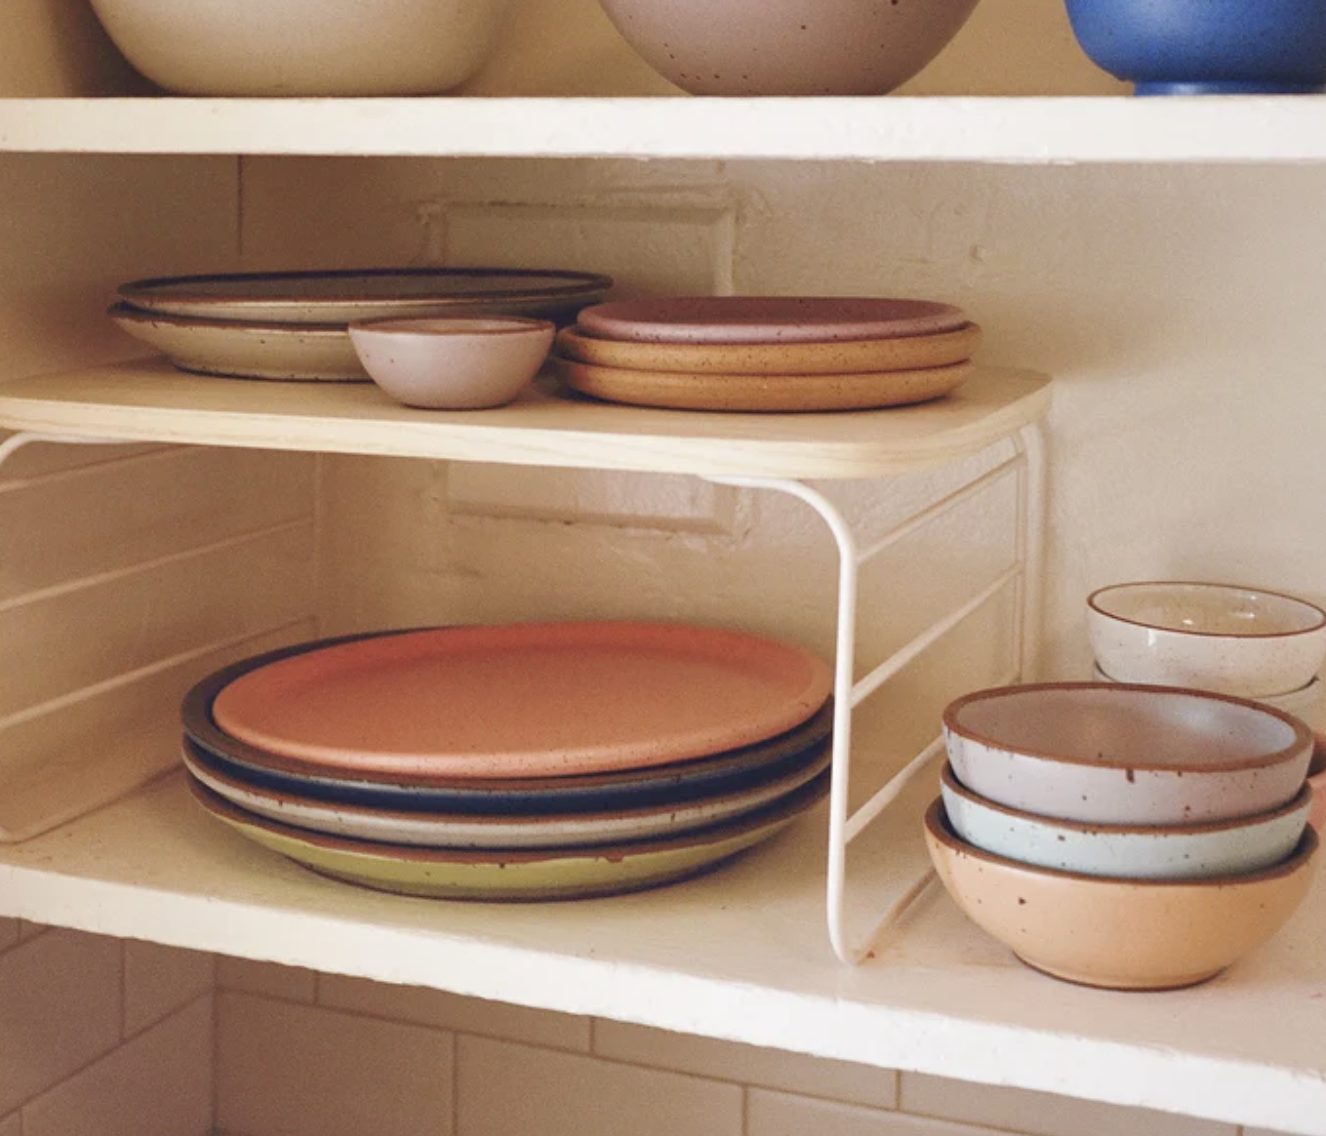 One shelf rises in a cabinet with plates underneath and more plates on top